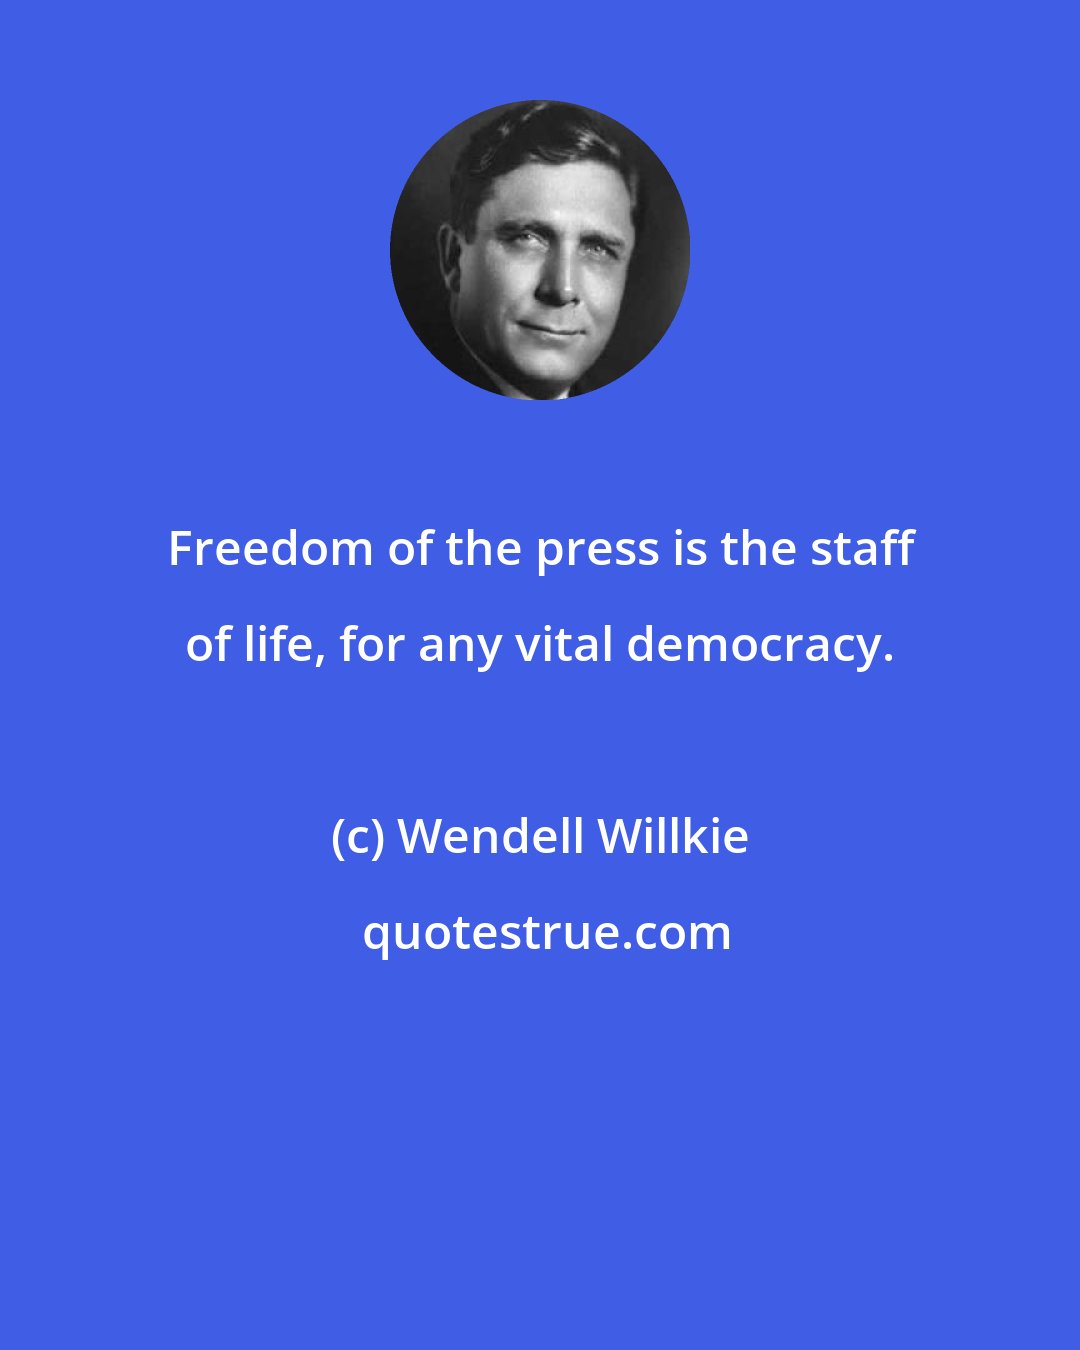 Wendell Willkie: Freedom of the press is the staff of life, for any vital democracy.